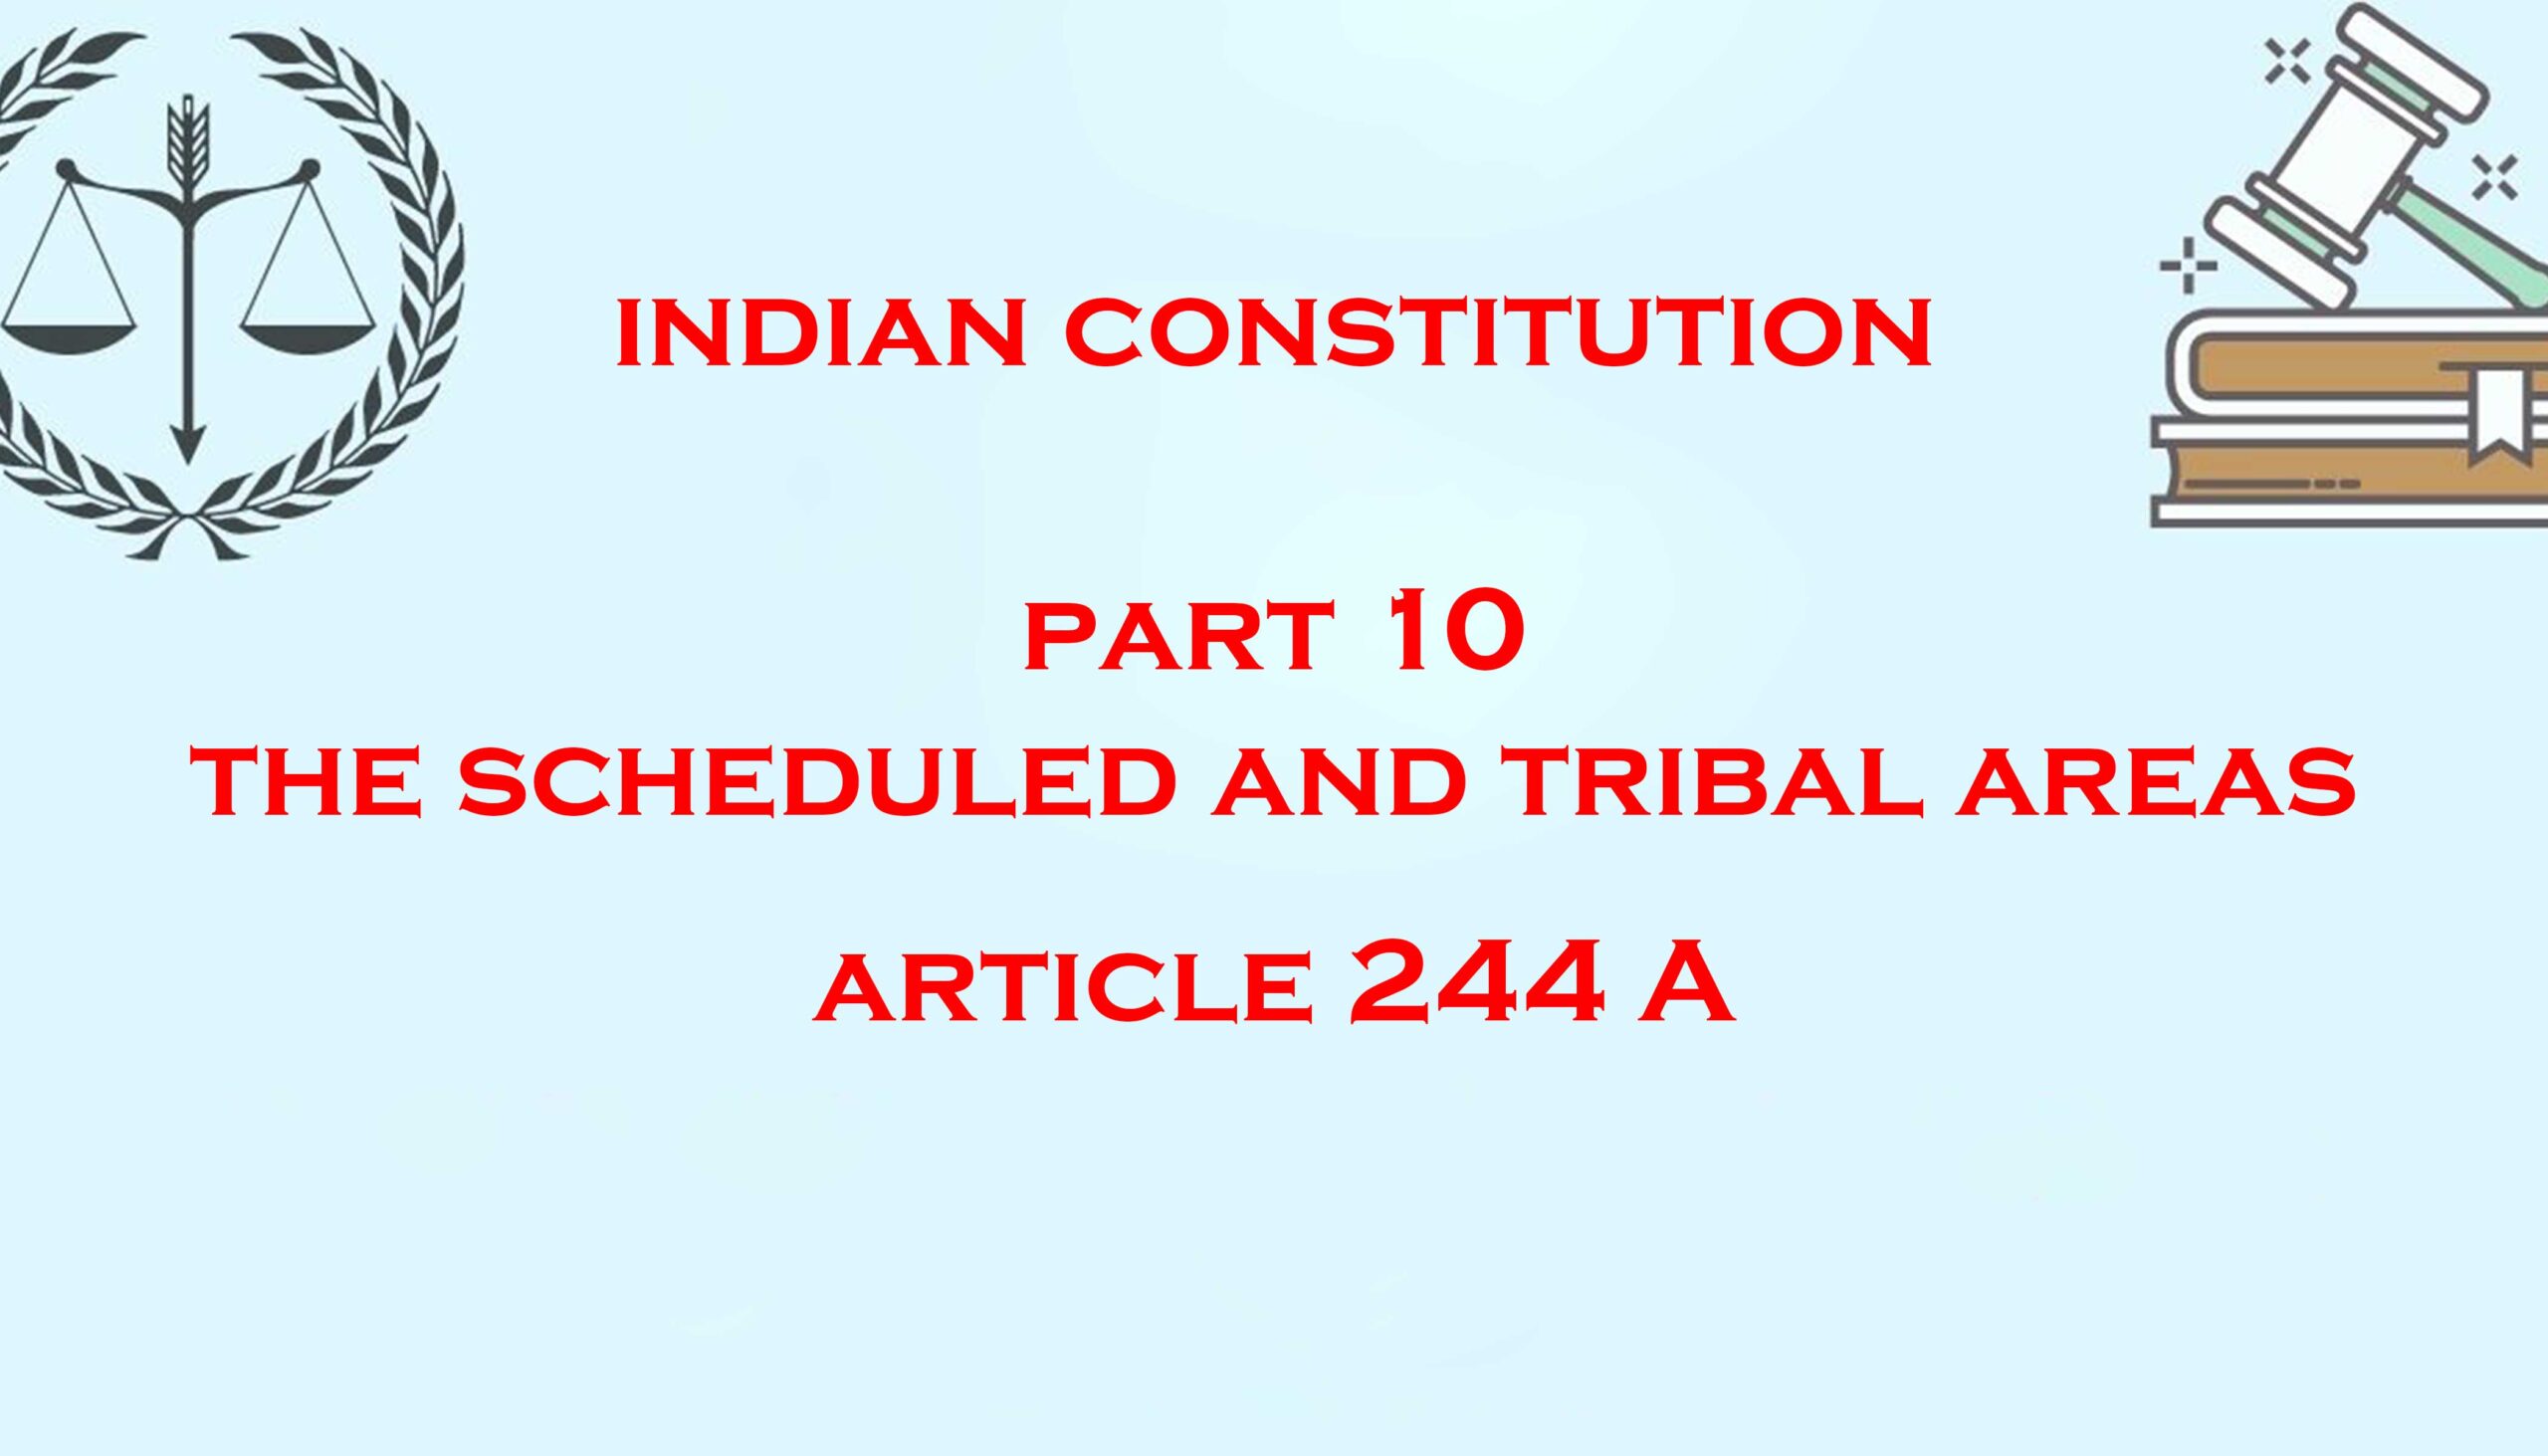 Article 244A – Formation of an autonomous State comprising certain tribal areas in Assam and creation of local Legislature or Council of Ministers or both therefor